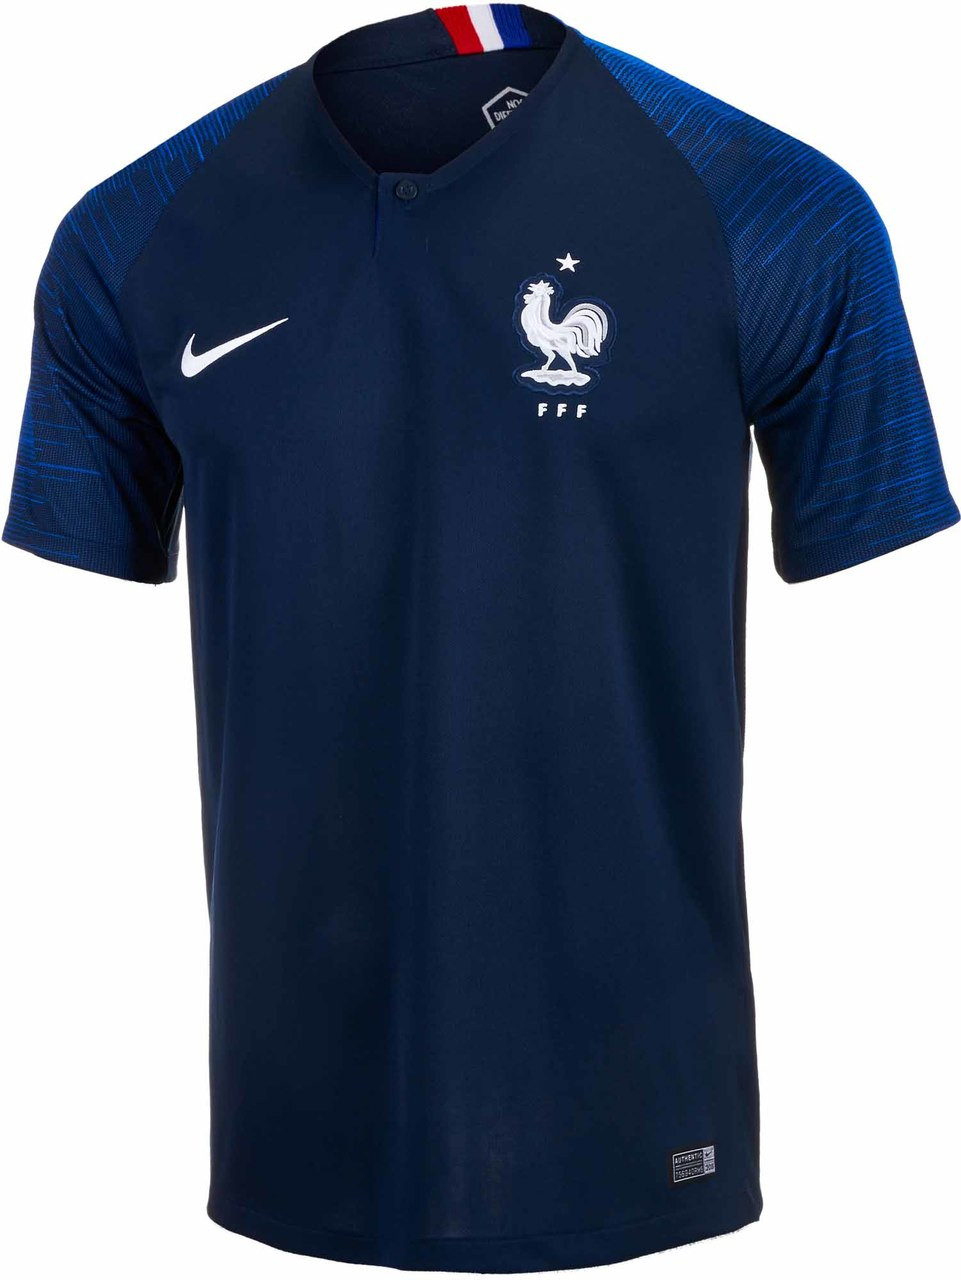 soccer jersey in french